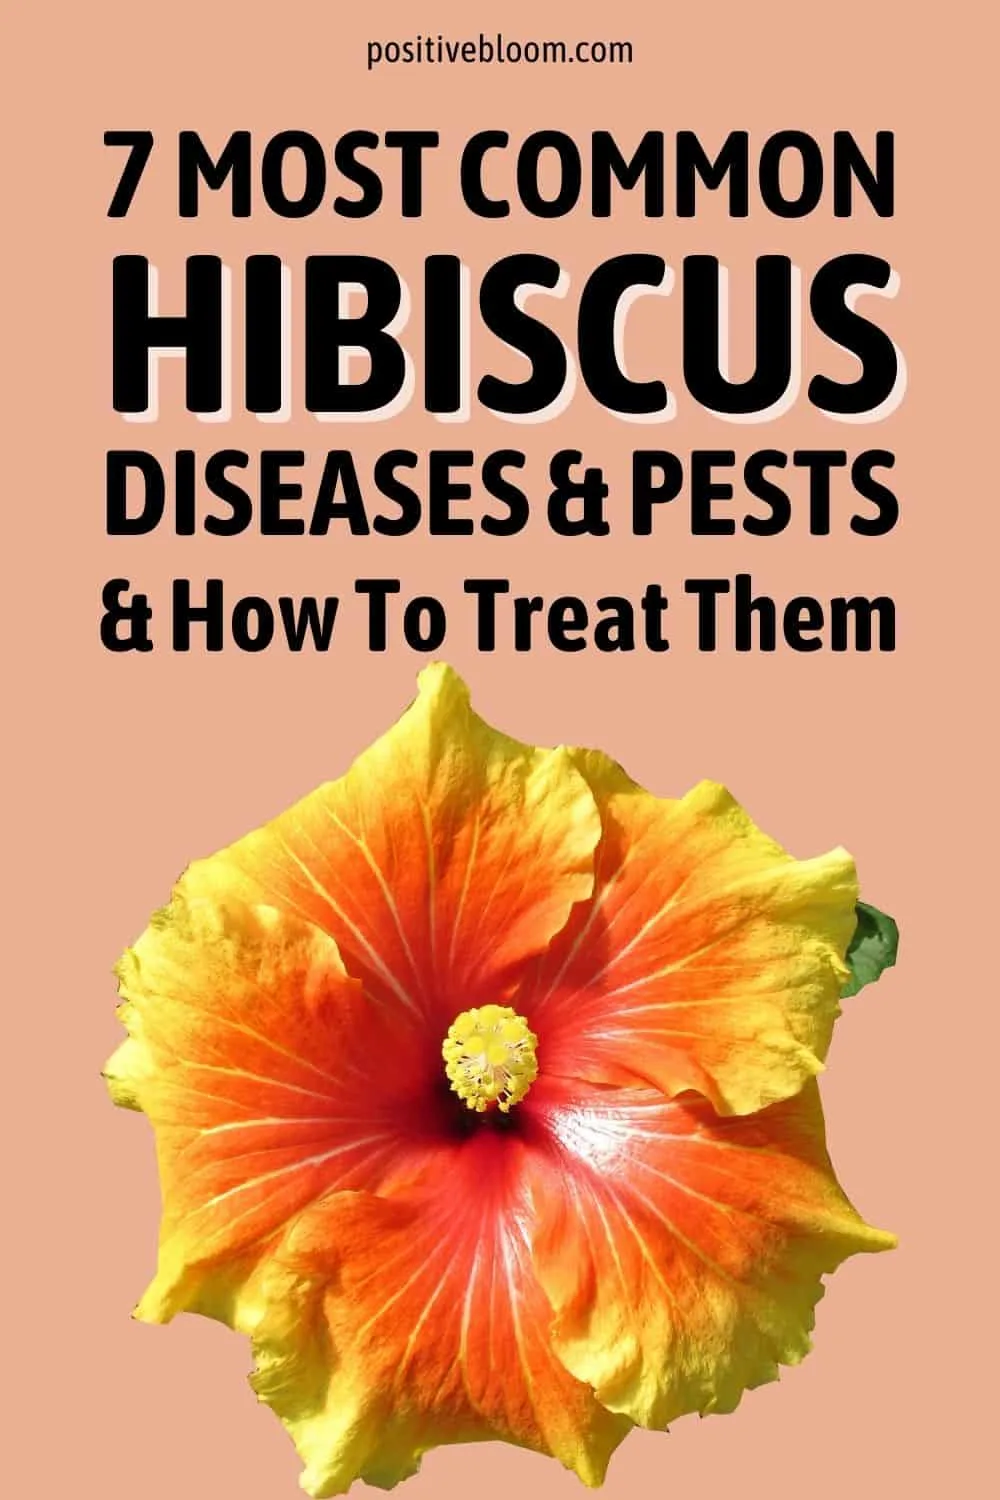 7 Most Common Hibiscus Diseases & Pests And How To Treat Them Pinterest